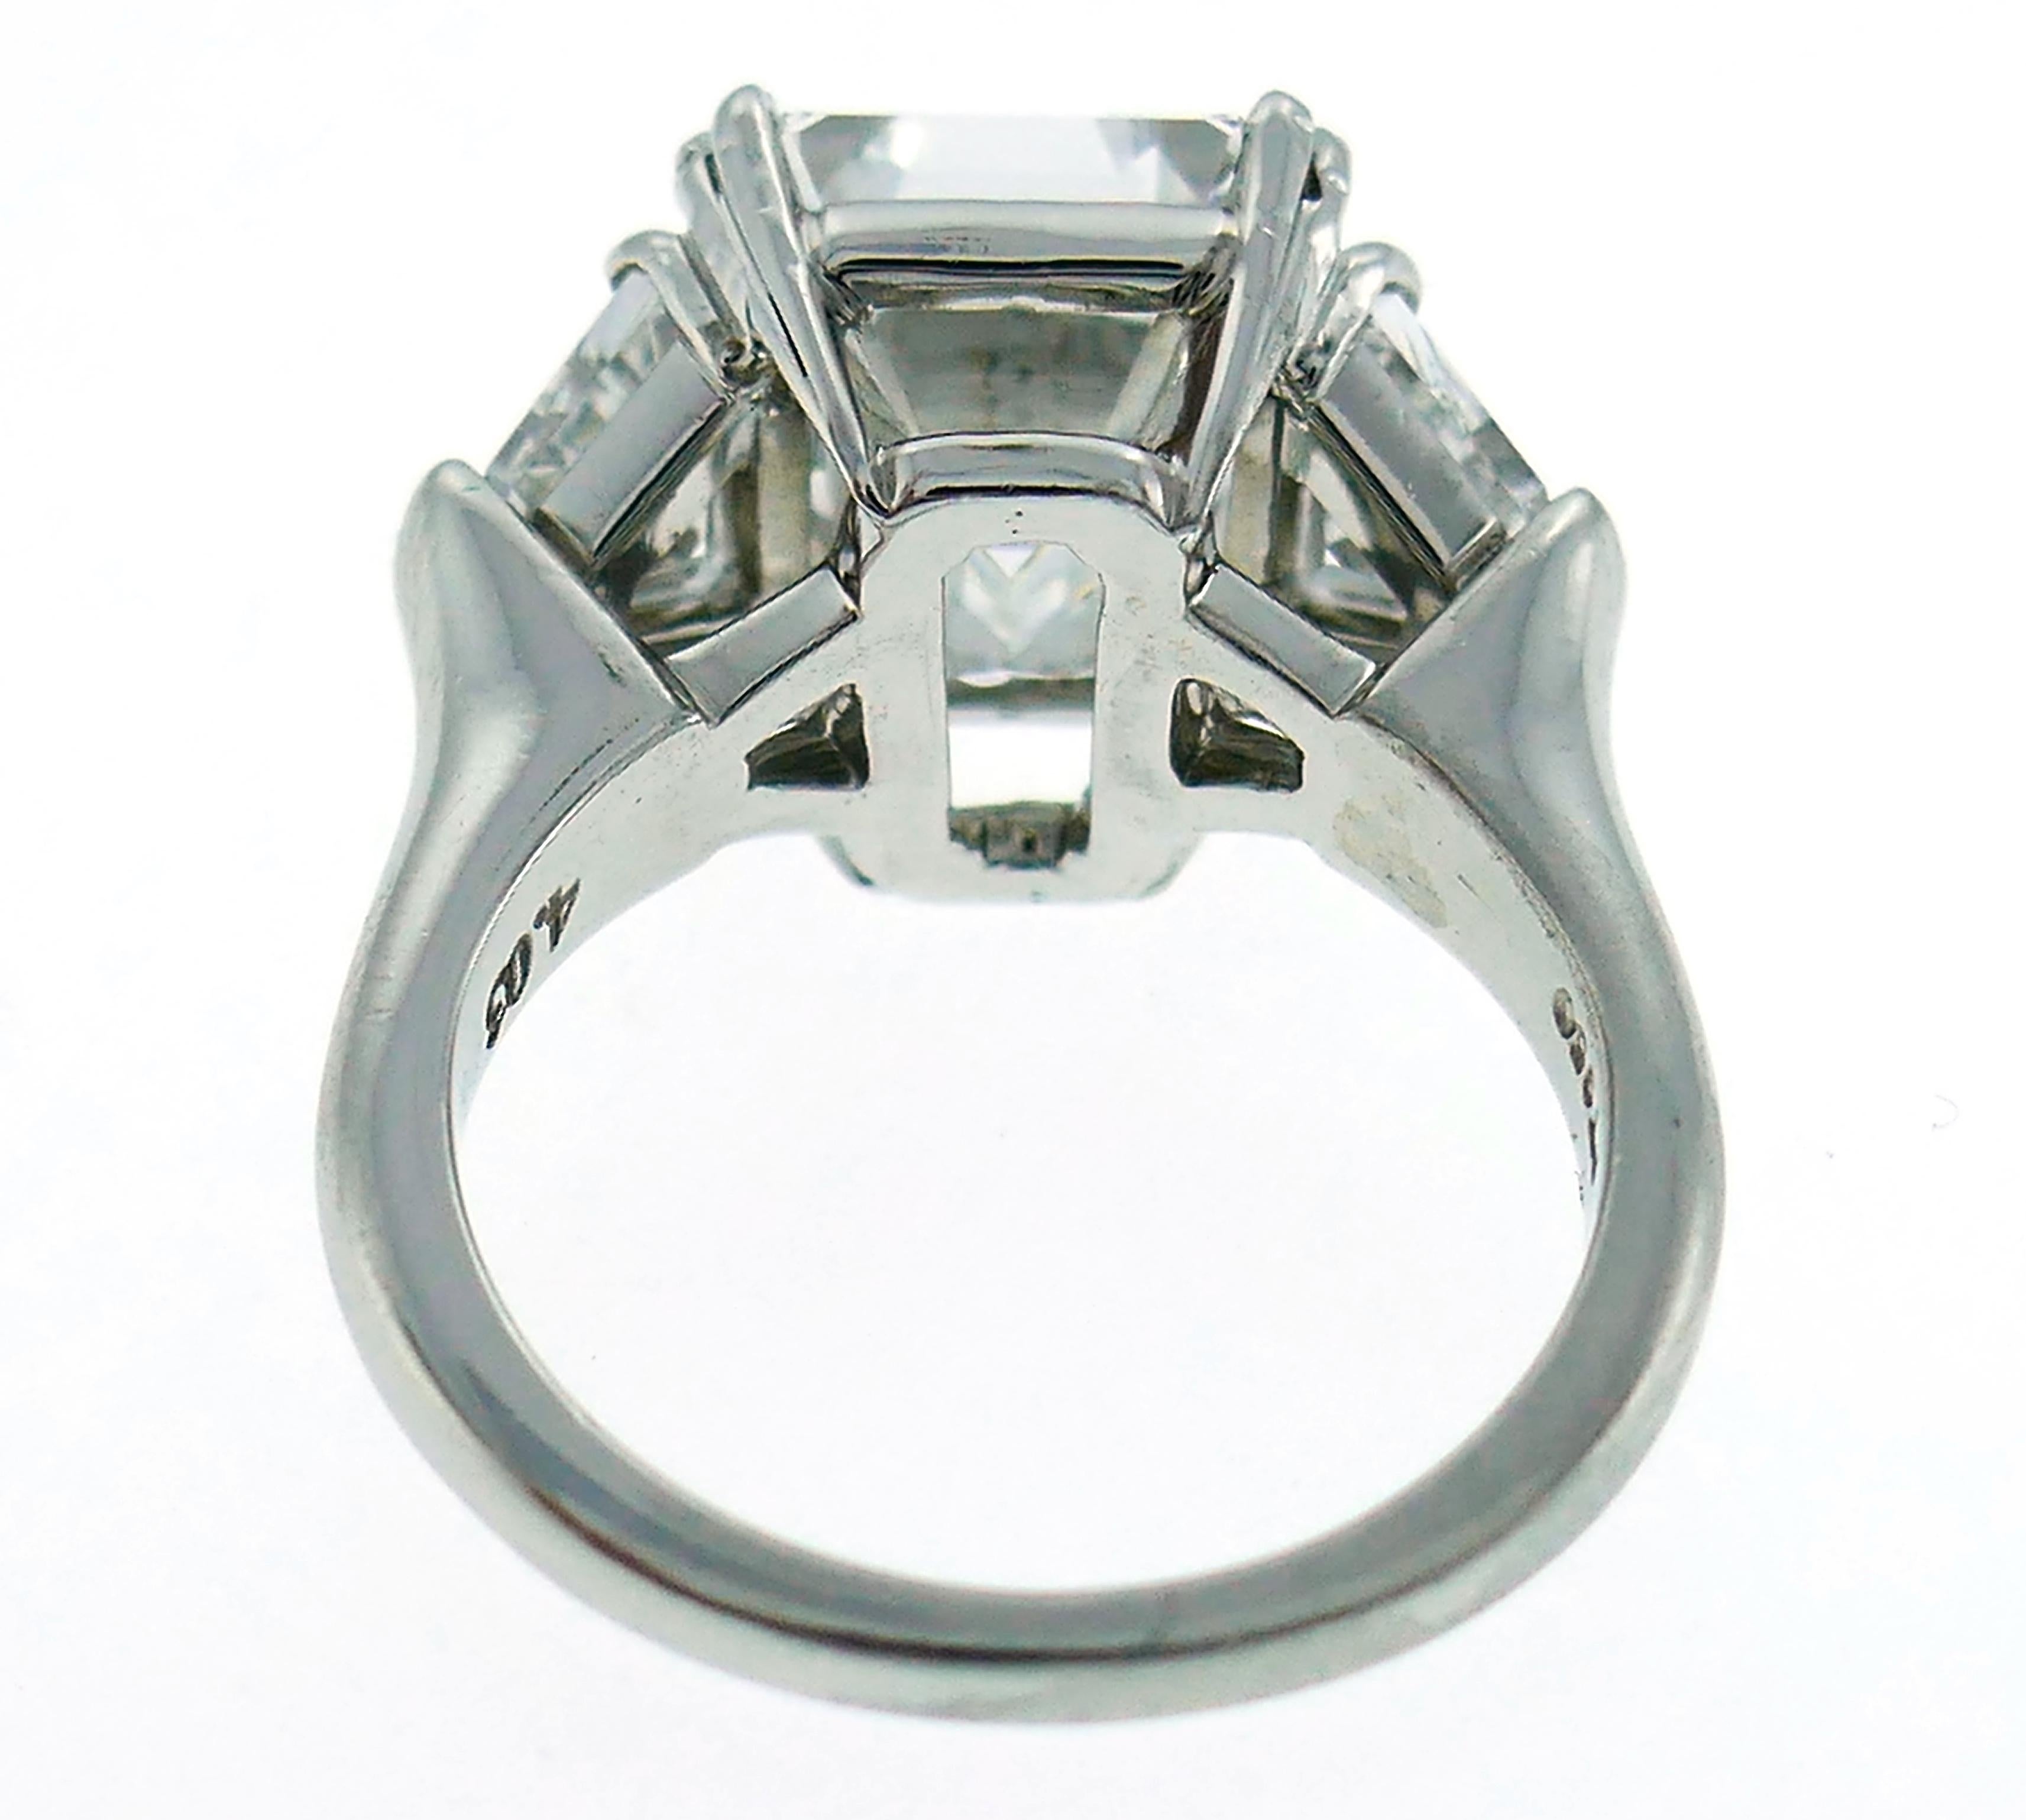 Harry Winston Diamond Platinum Ring 4.03 Carat Emerald Cut E/VS1 GIA In Excellent Condition For Sale In Beverly Hills, CA